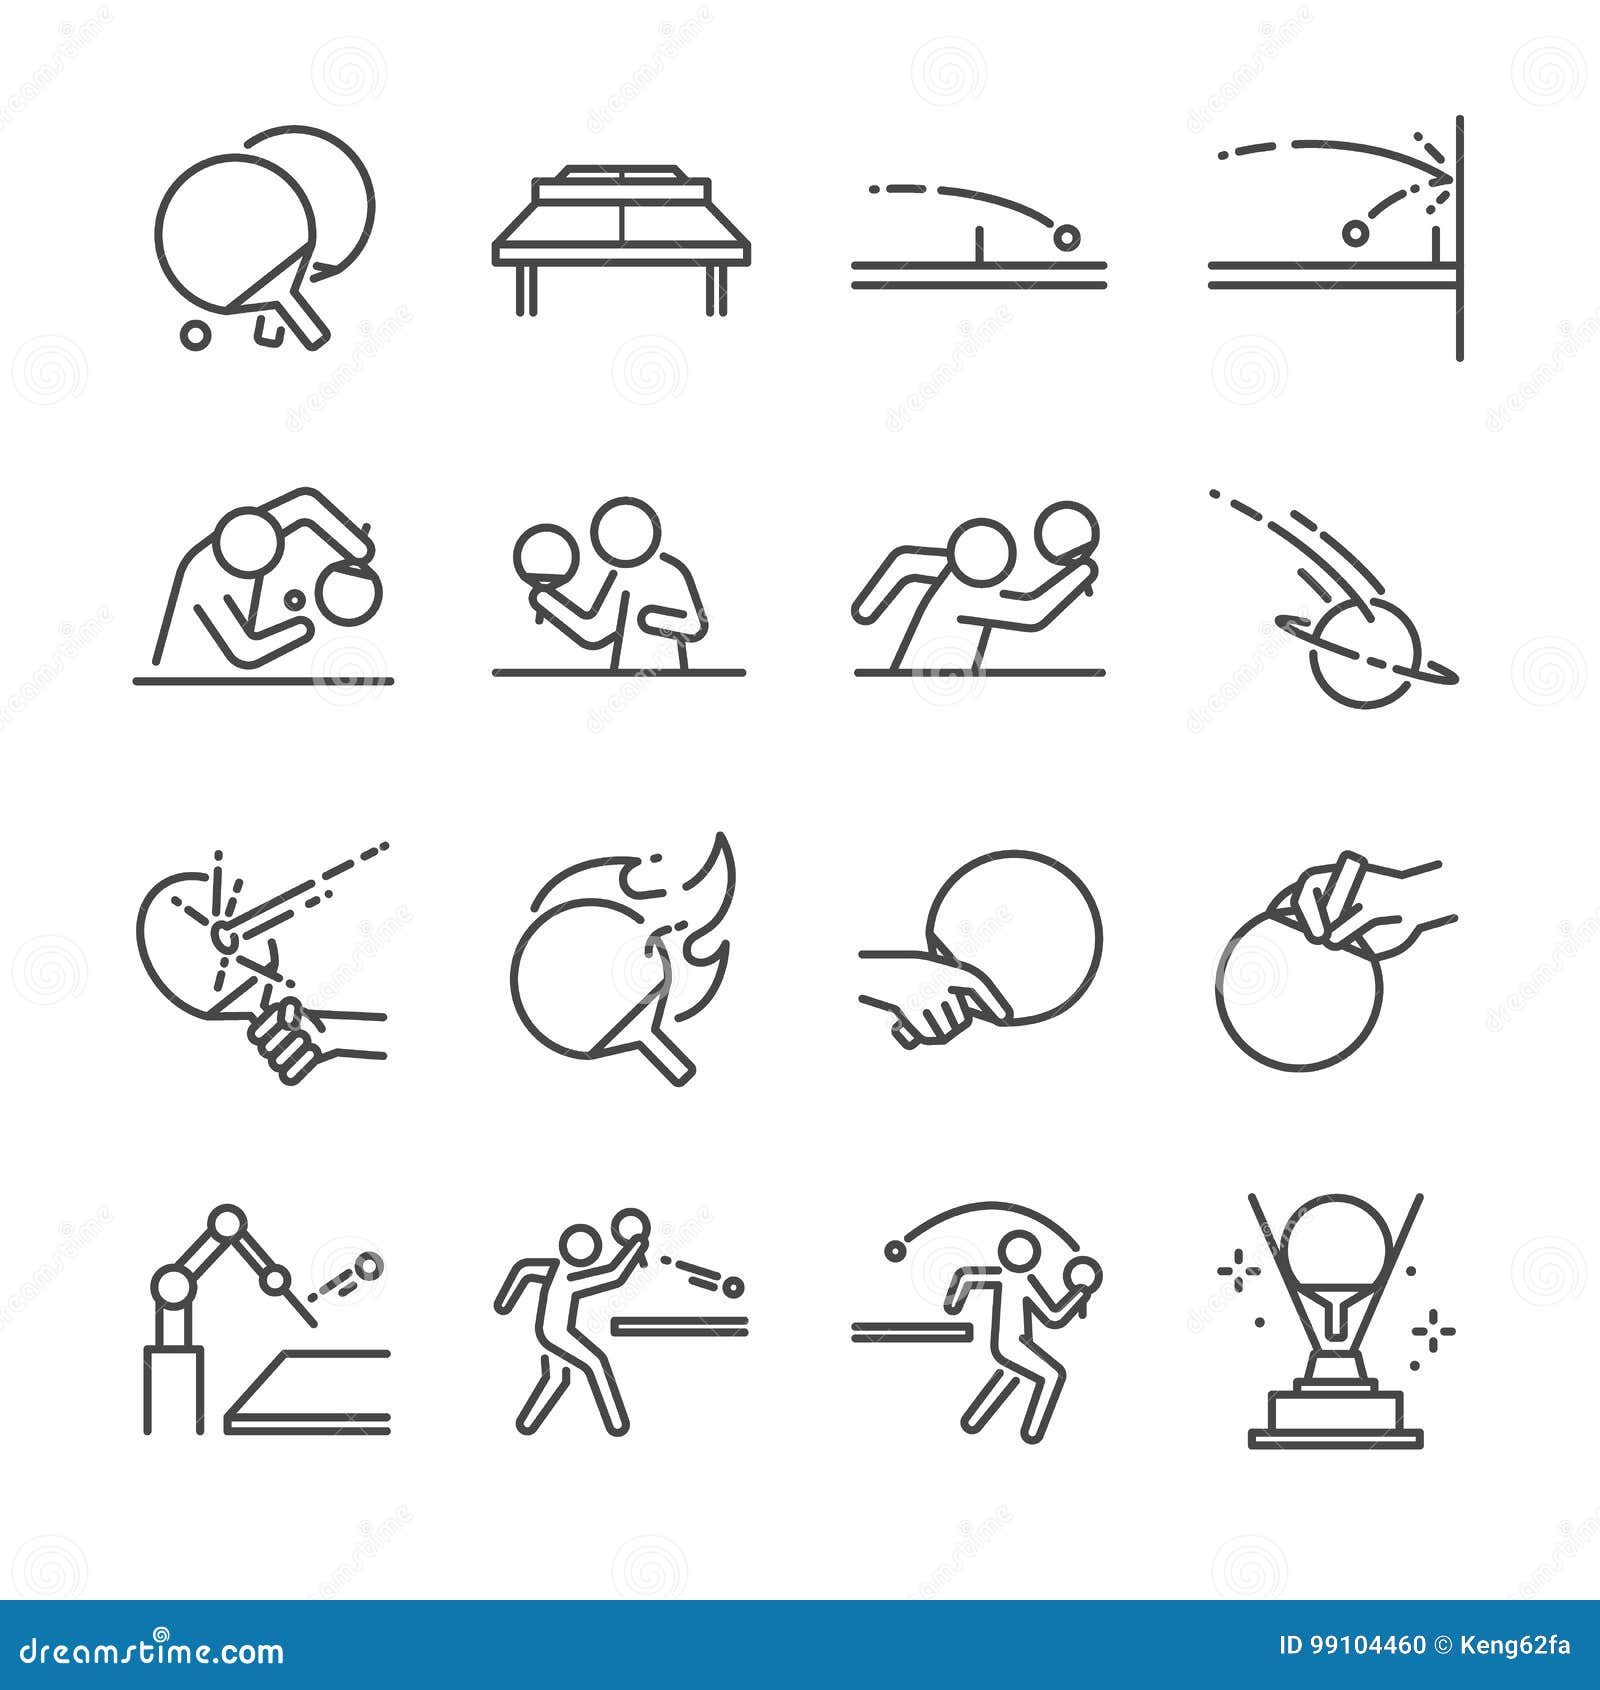 ping pong line icon set. included the icons as ball, racket, table tennis, player, serves, defender, table tennis and more.